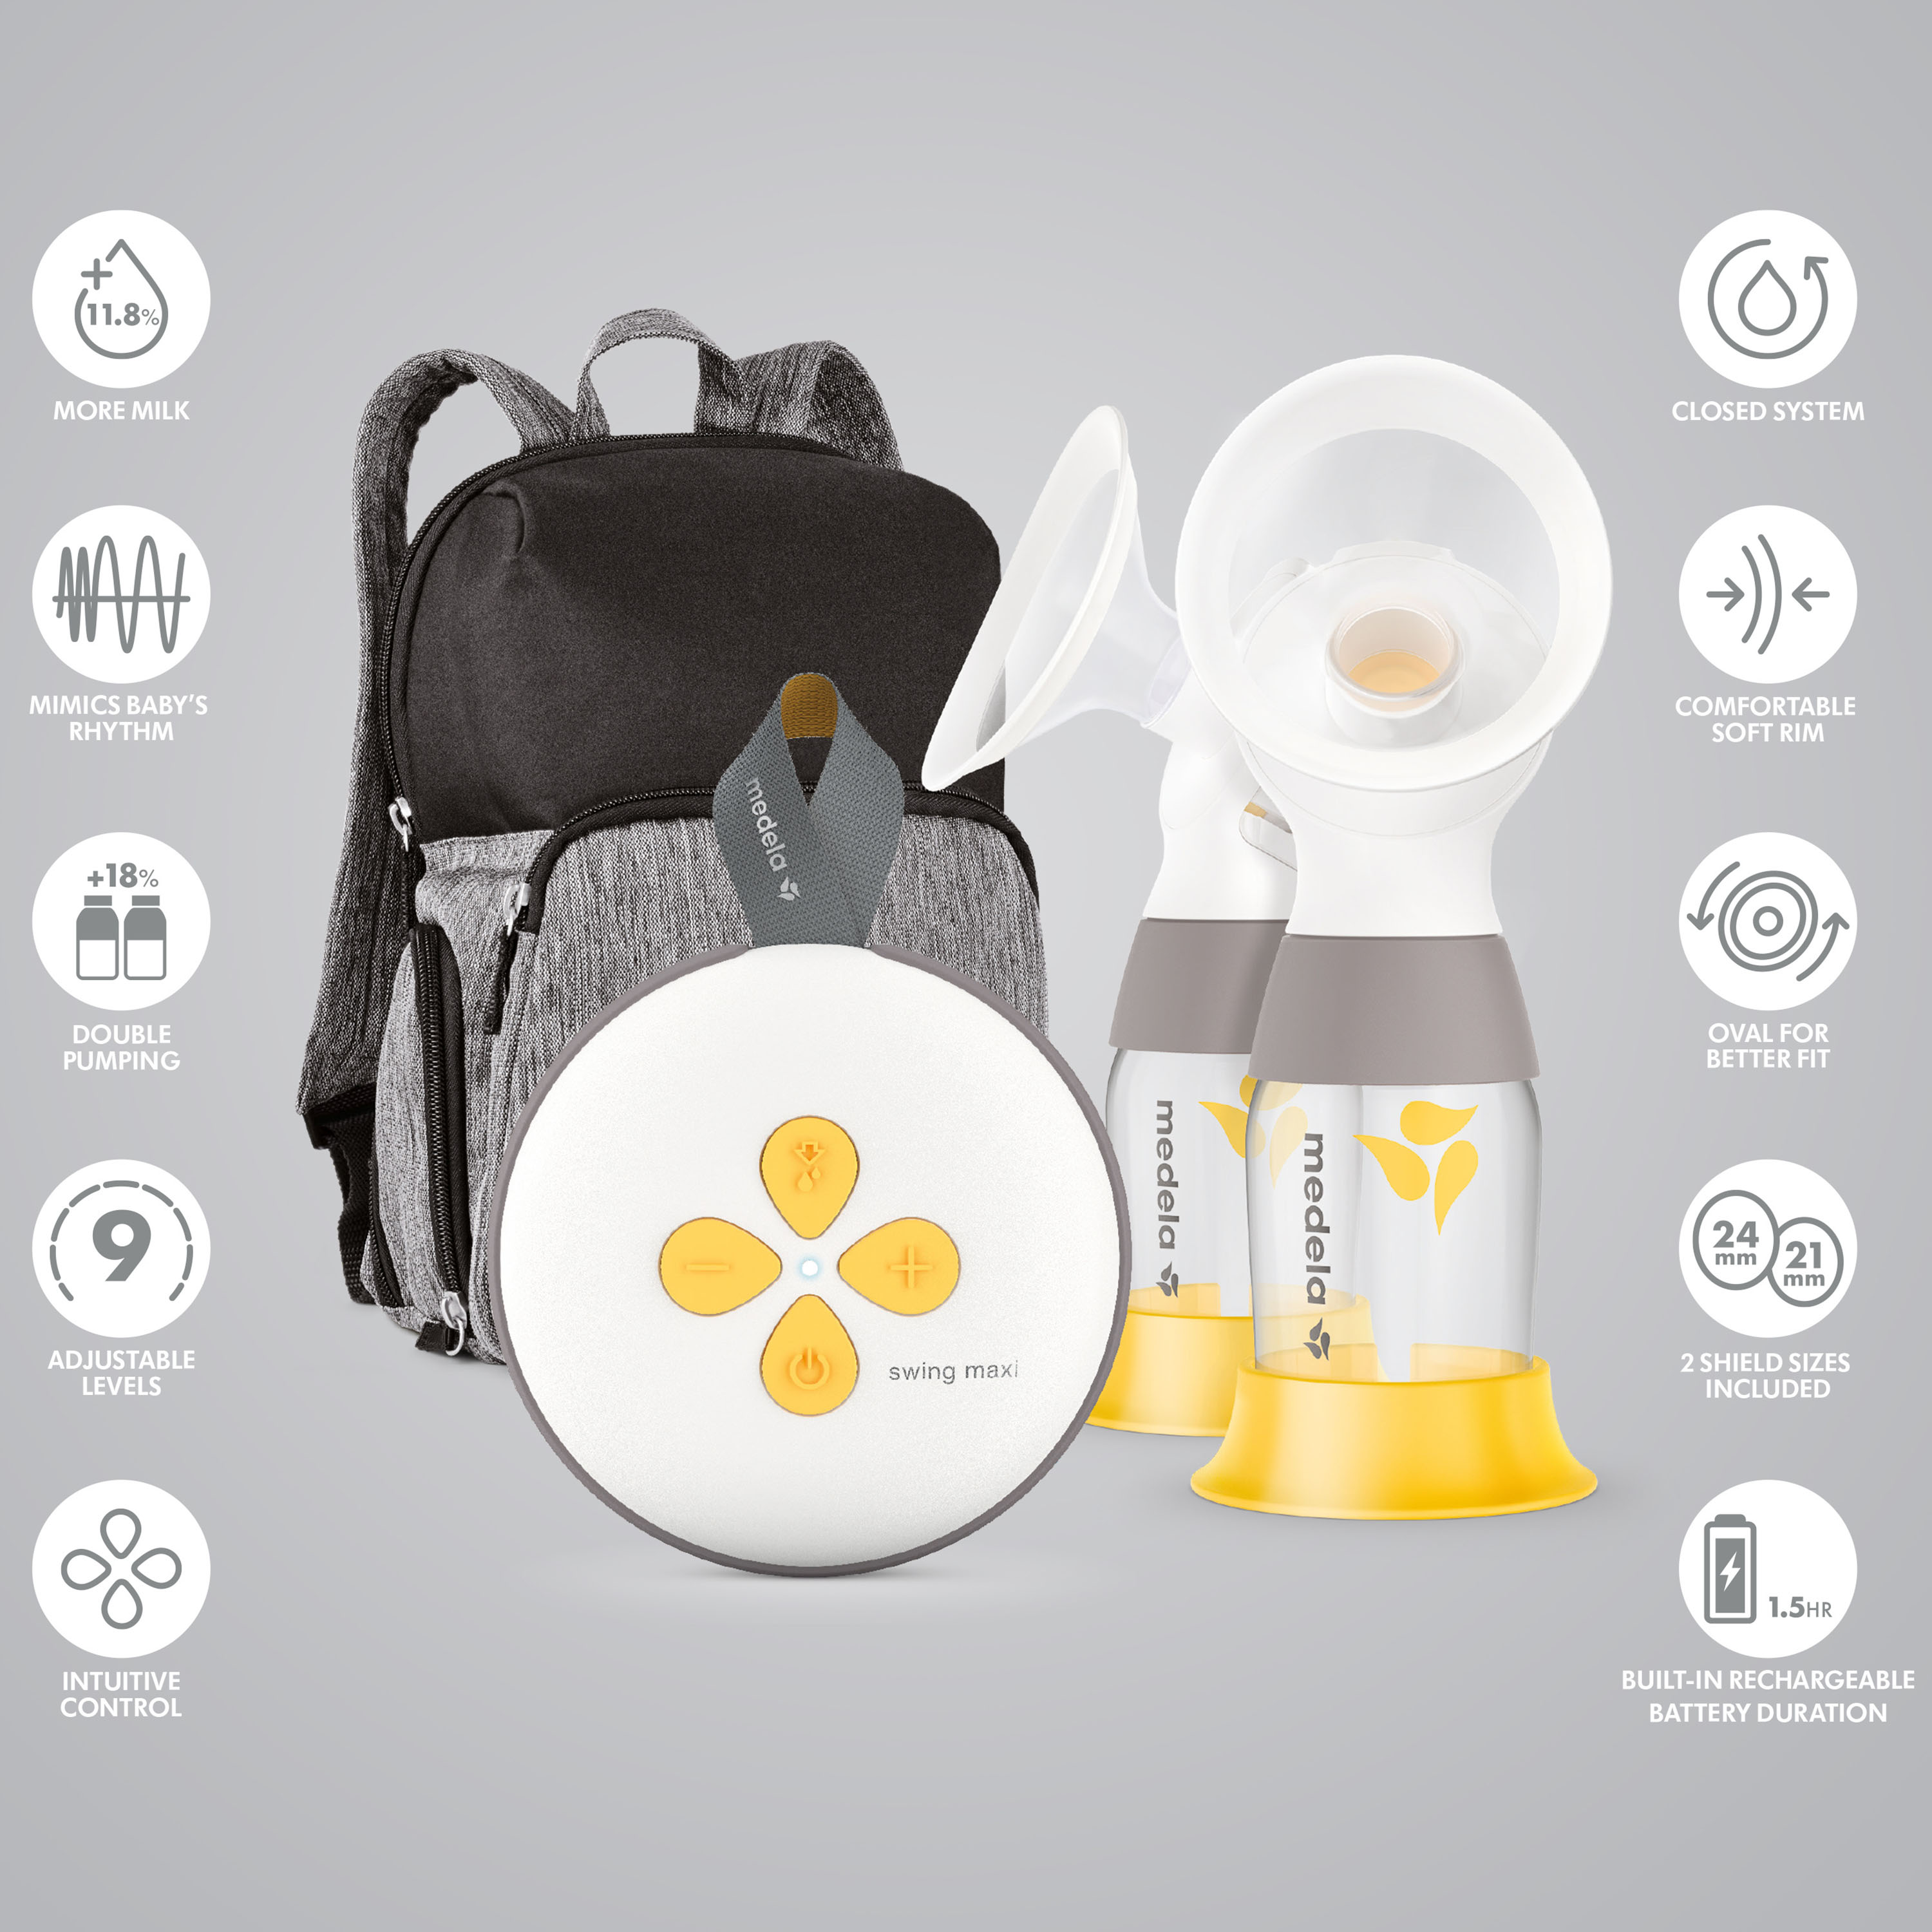 How to Use the New Medela Swing Maxi Breast Pump 